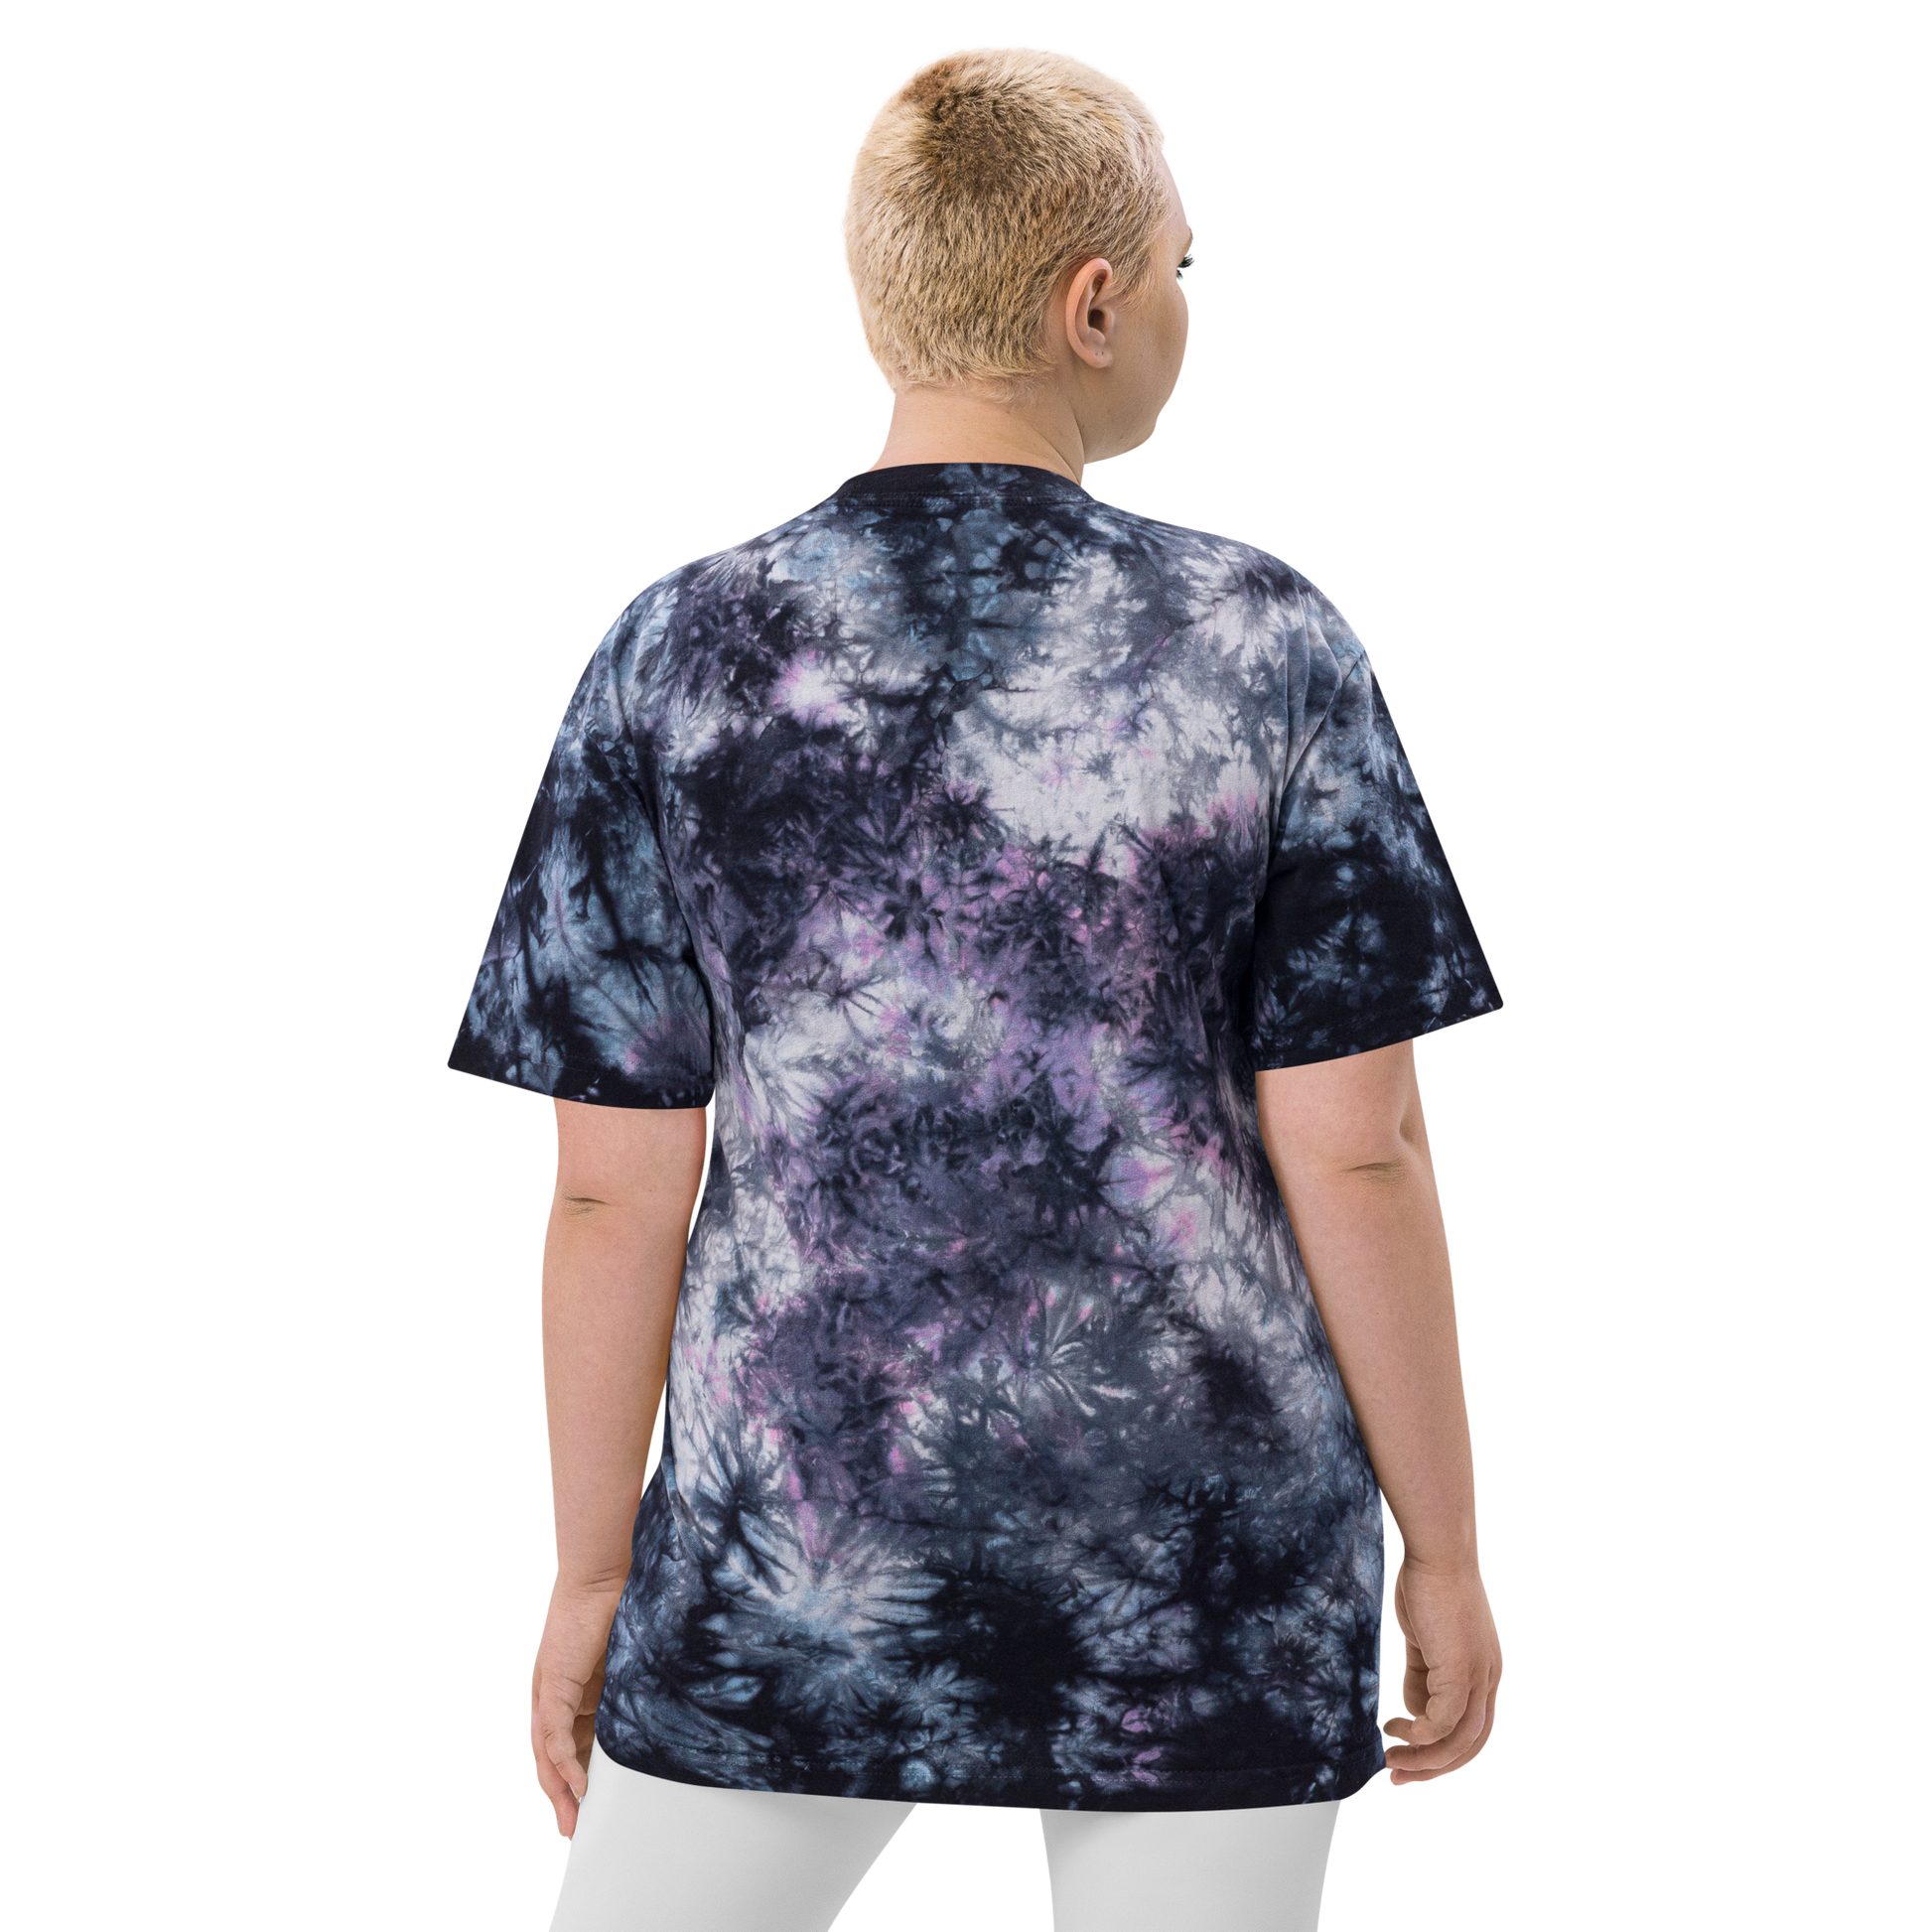 YHM Designs - YFB Iqaluit Oversized Tie-Dye T-Shirt - Crossed-X Design with Airport Code and Vintage Propliner - White Embroidery - Image 06